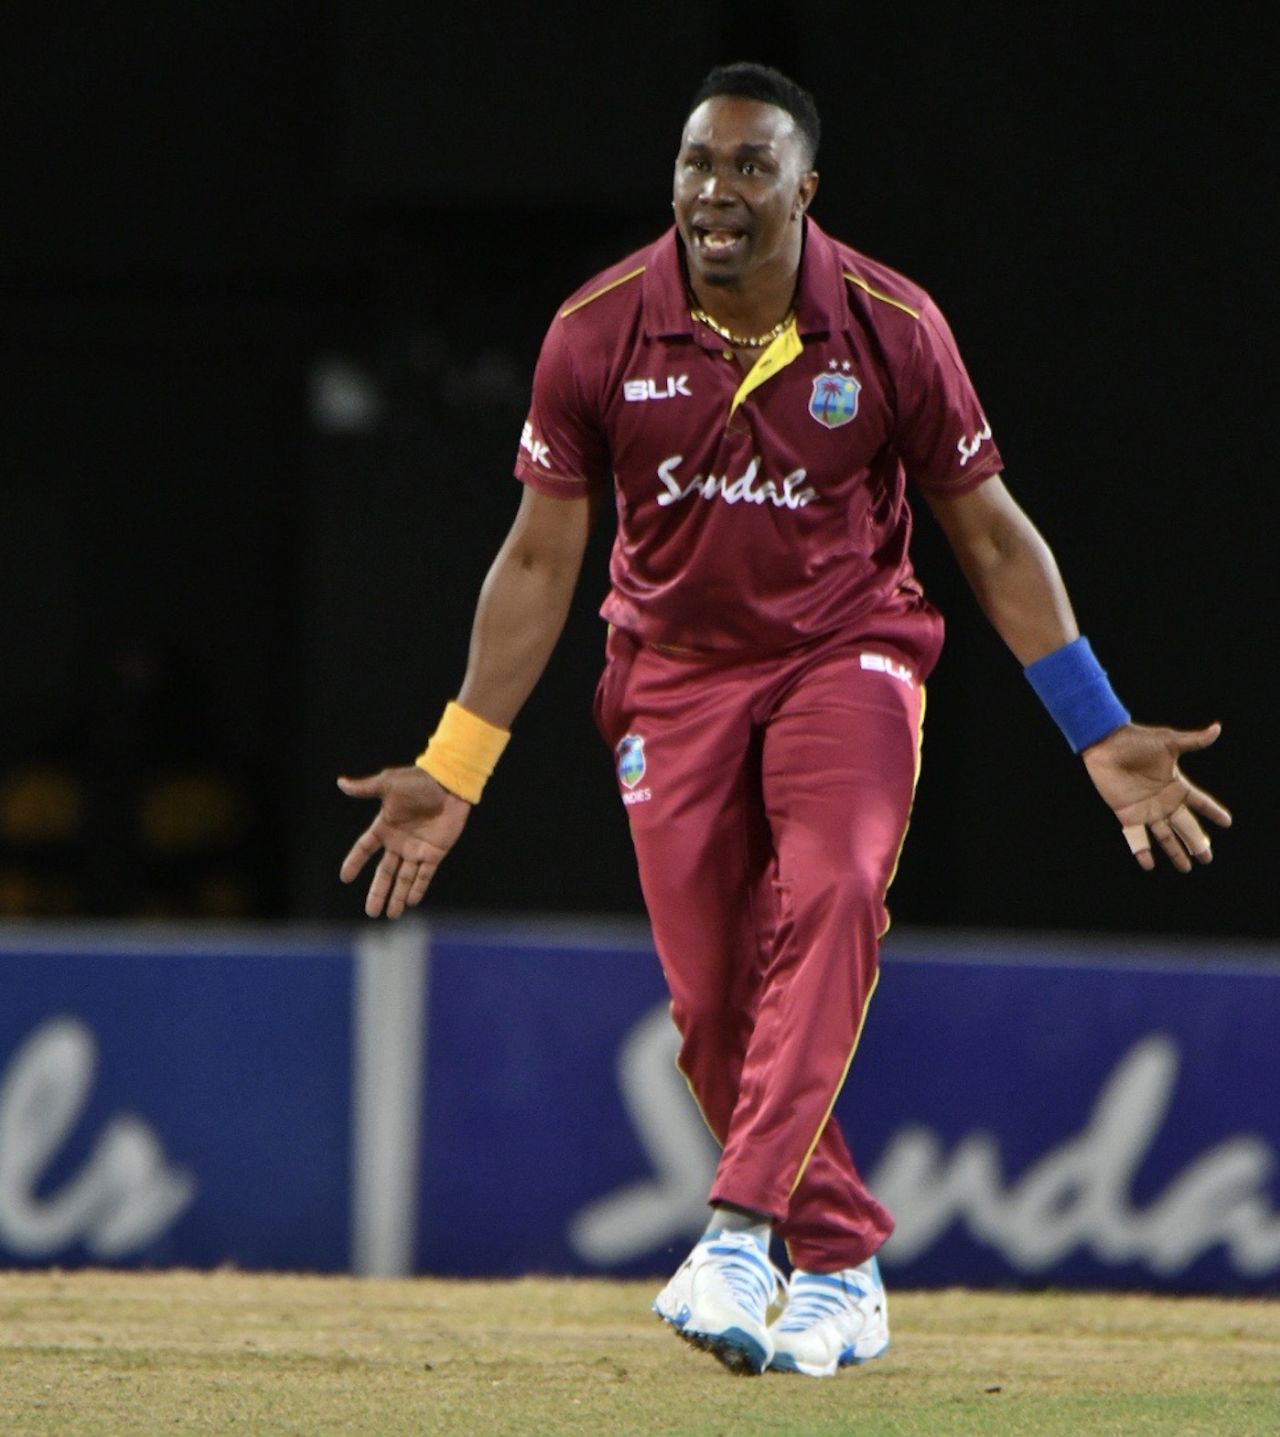 Dwayne Bravo reacts during his three-wicket spell, West Indies v Ireland, 3rd T20I, St Kitts, January 19, 2020